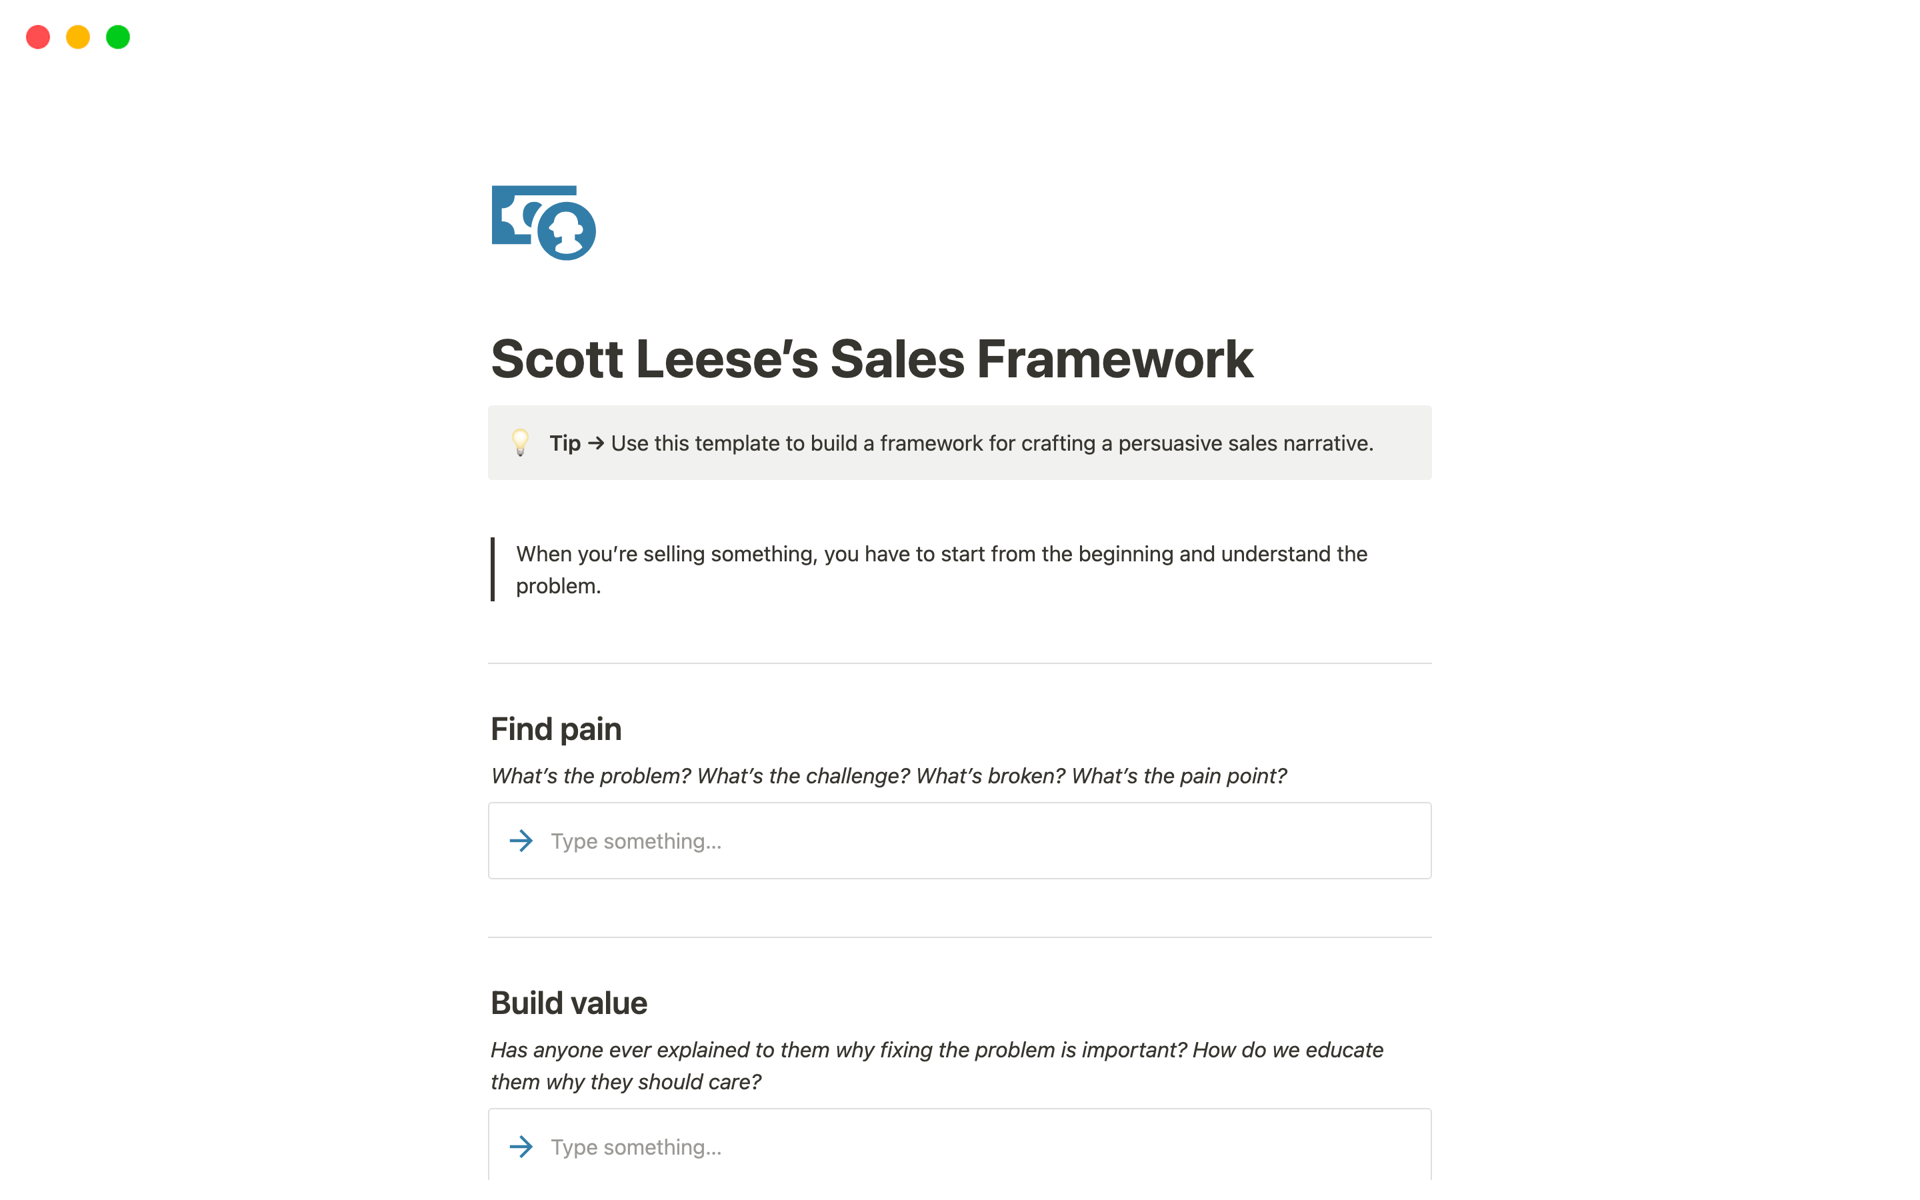 Use this template to build a framework for crafting a persuasive sales narrative.